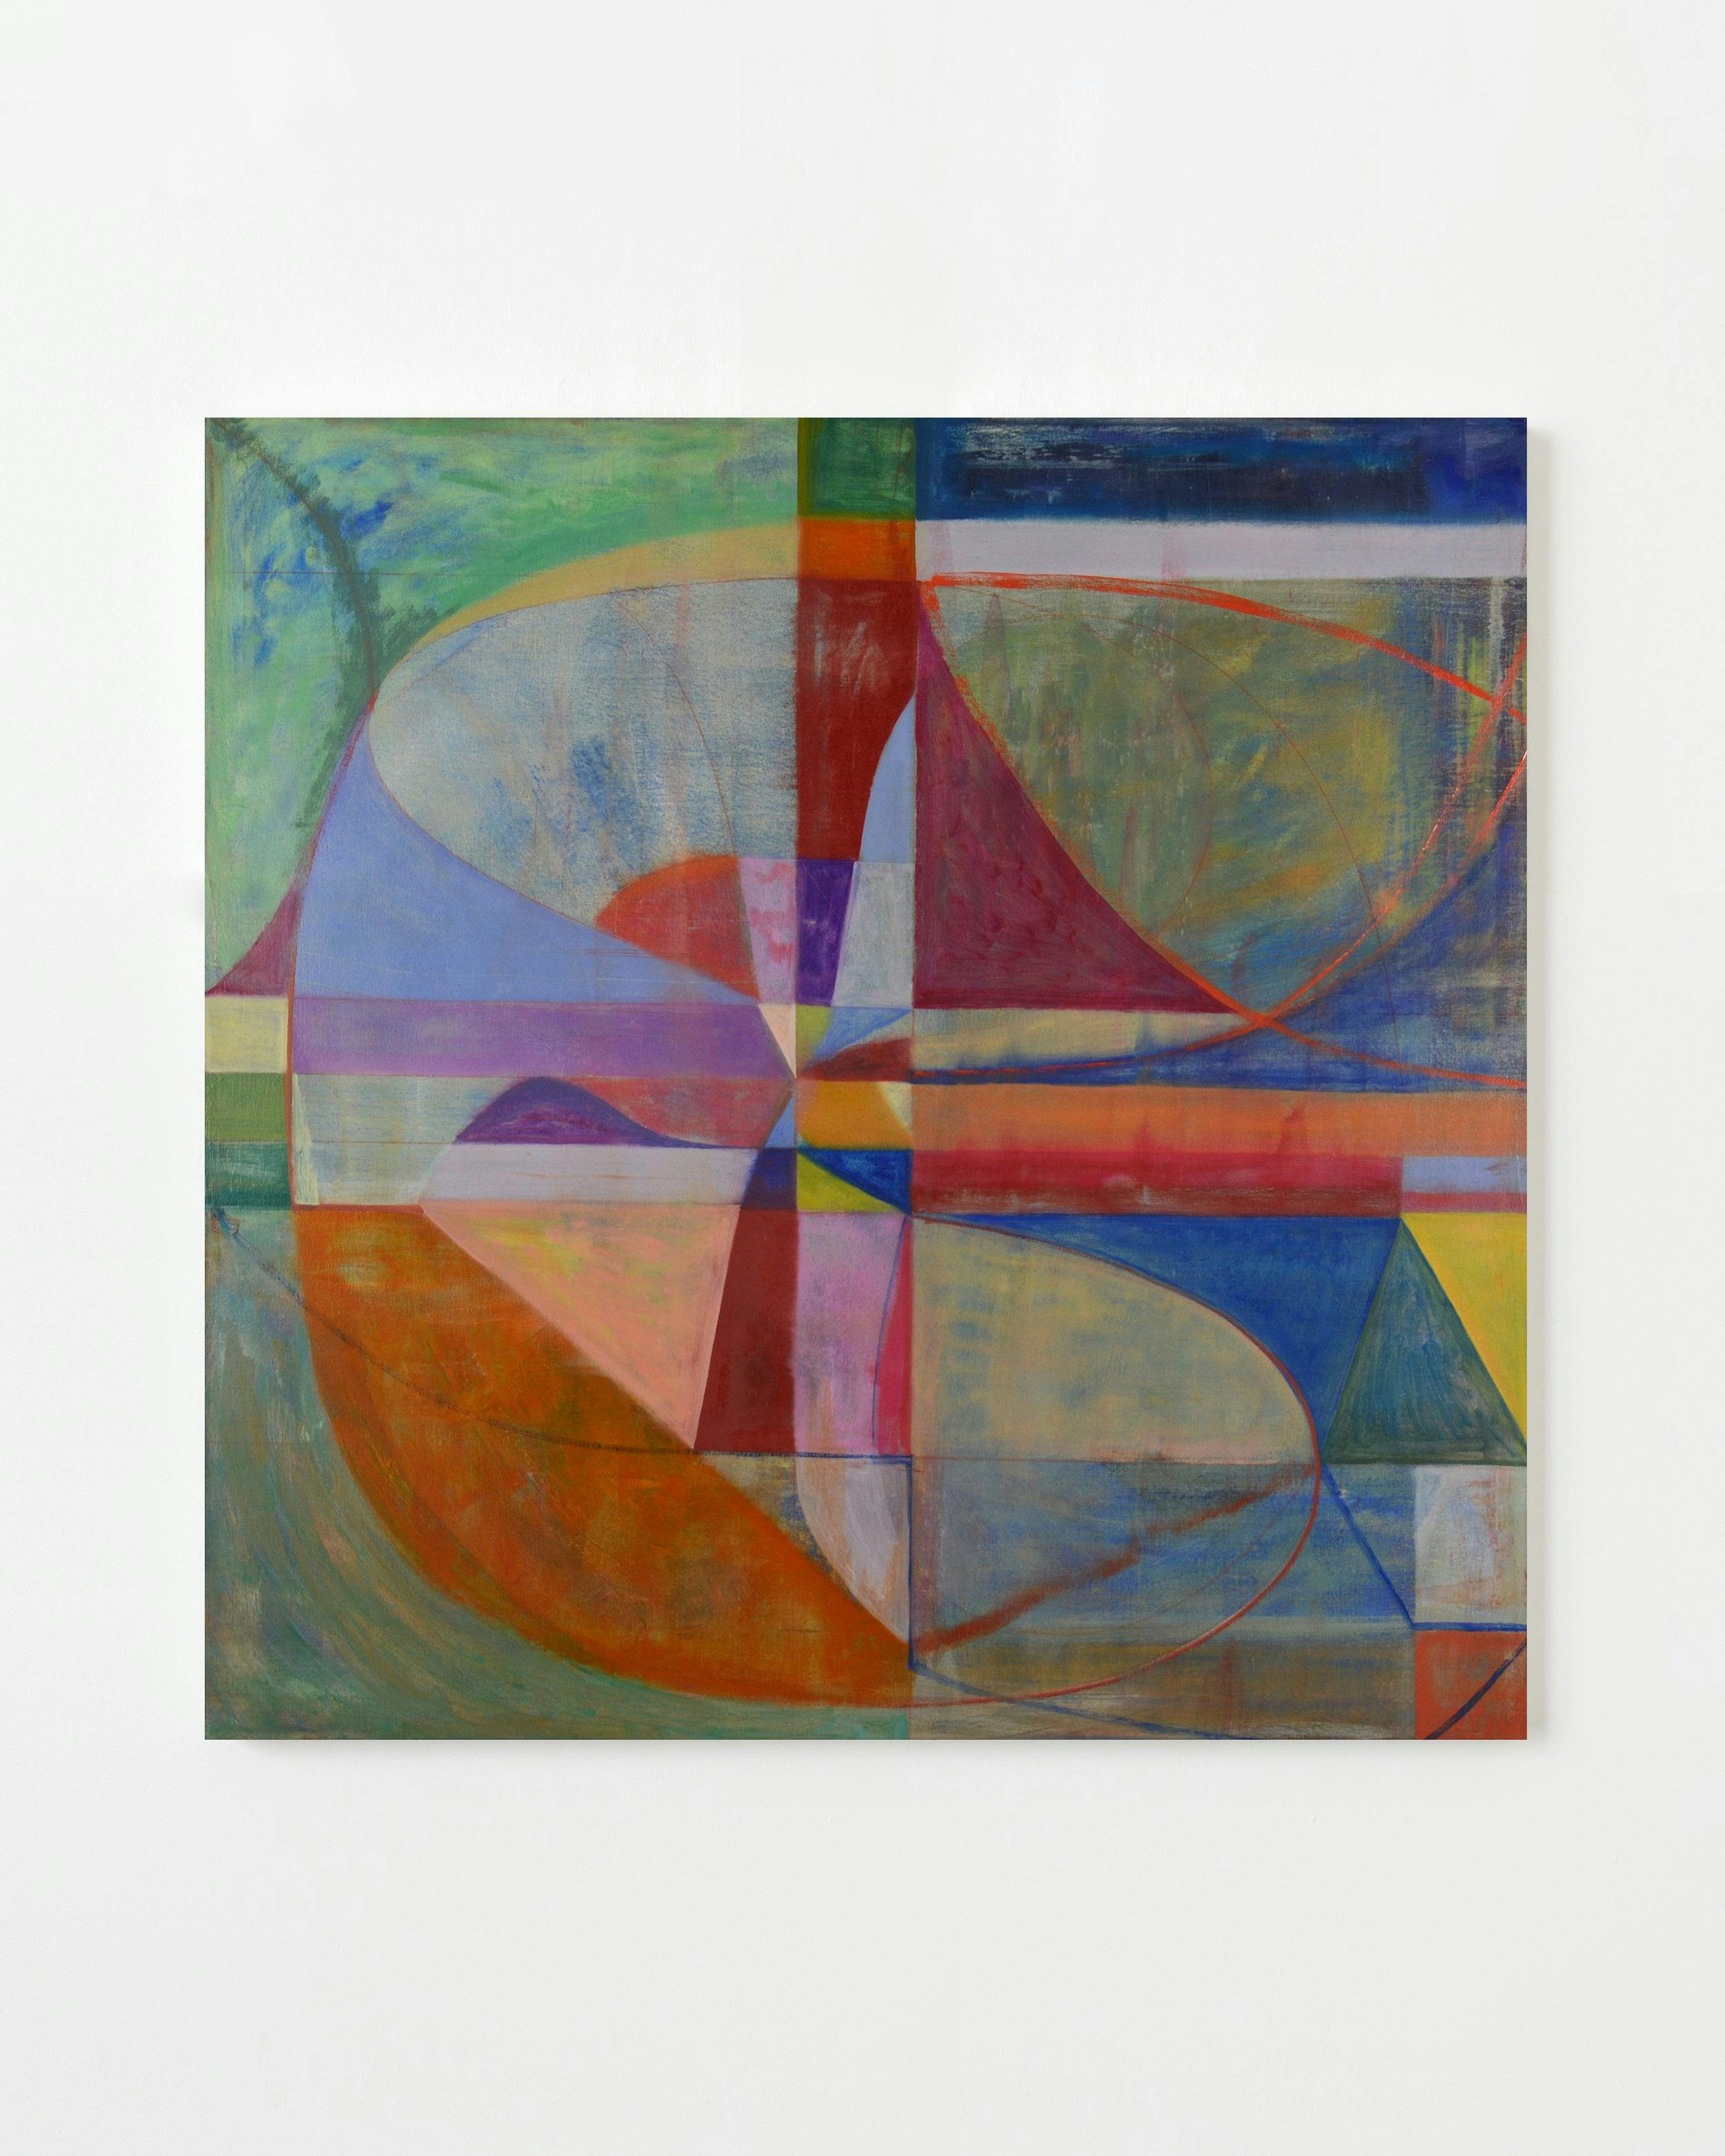 Painting by Jackie Meier titled "Tumult".